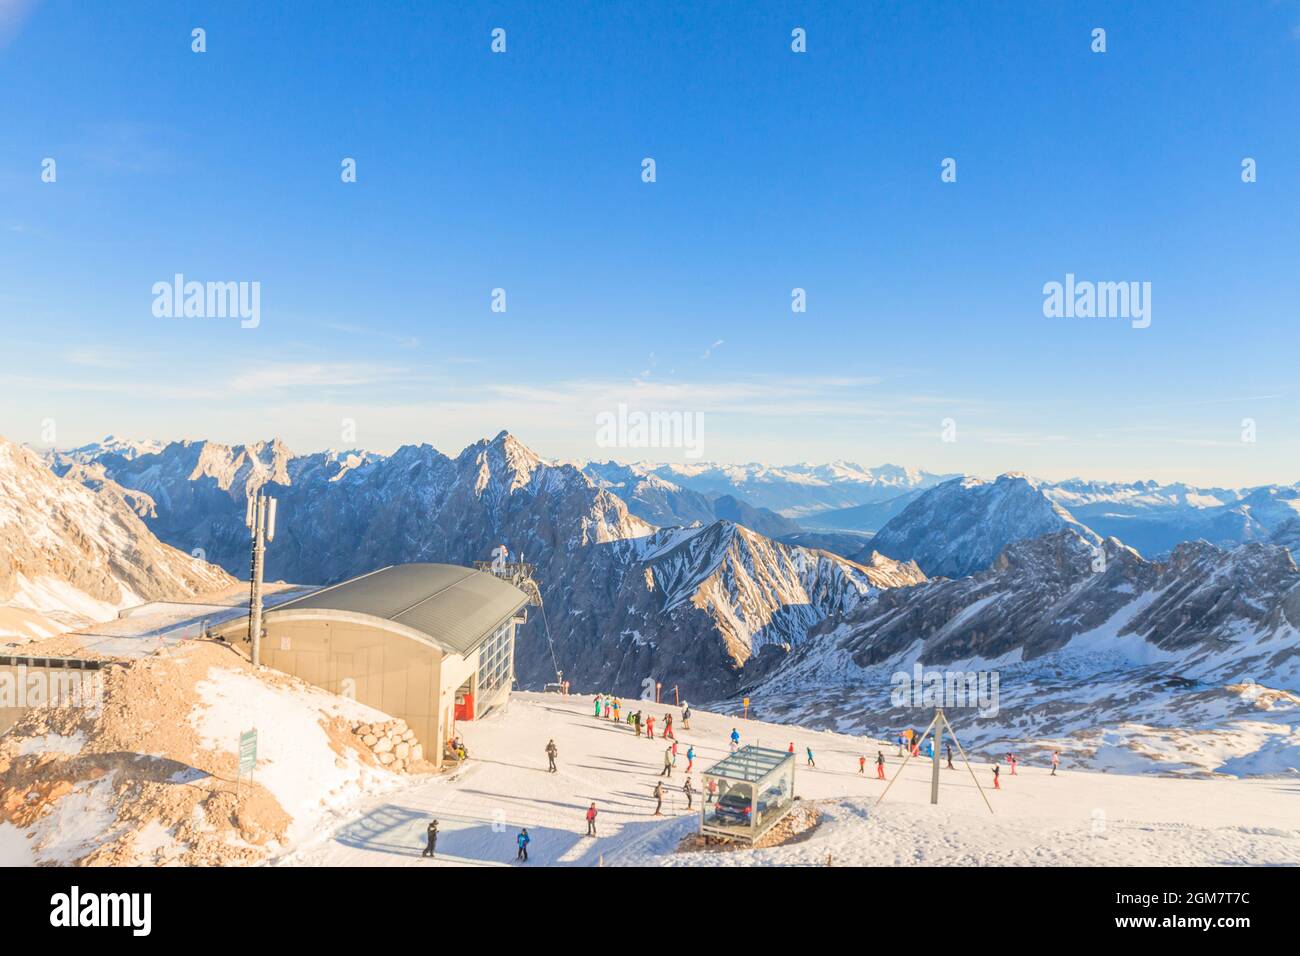 Zugspitze Glacier Ski Resort in Bavarian Alps, Germany. The Zugspitze, at 2,962 meters above sea level, is the highest mountain in Germany Stock Photo